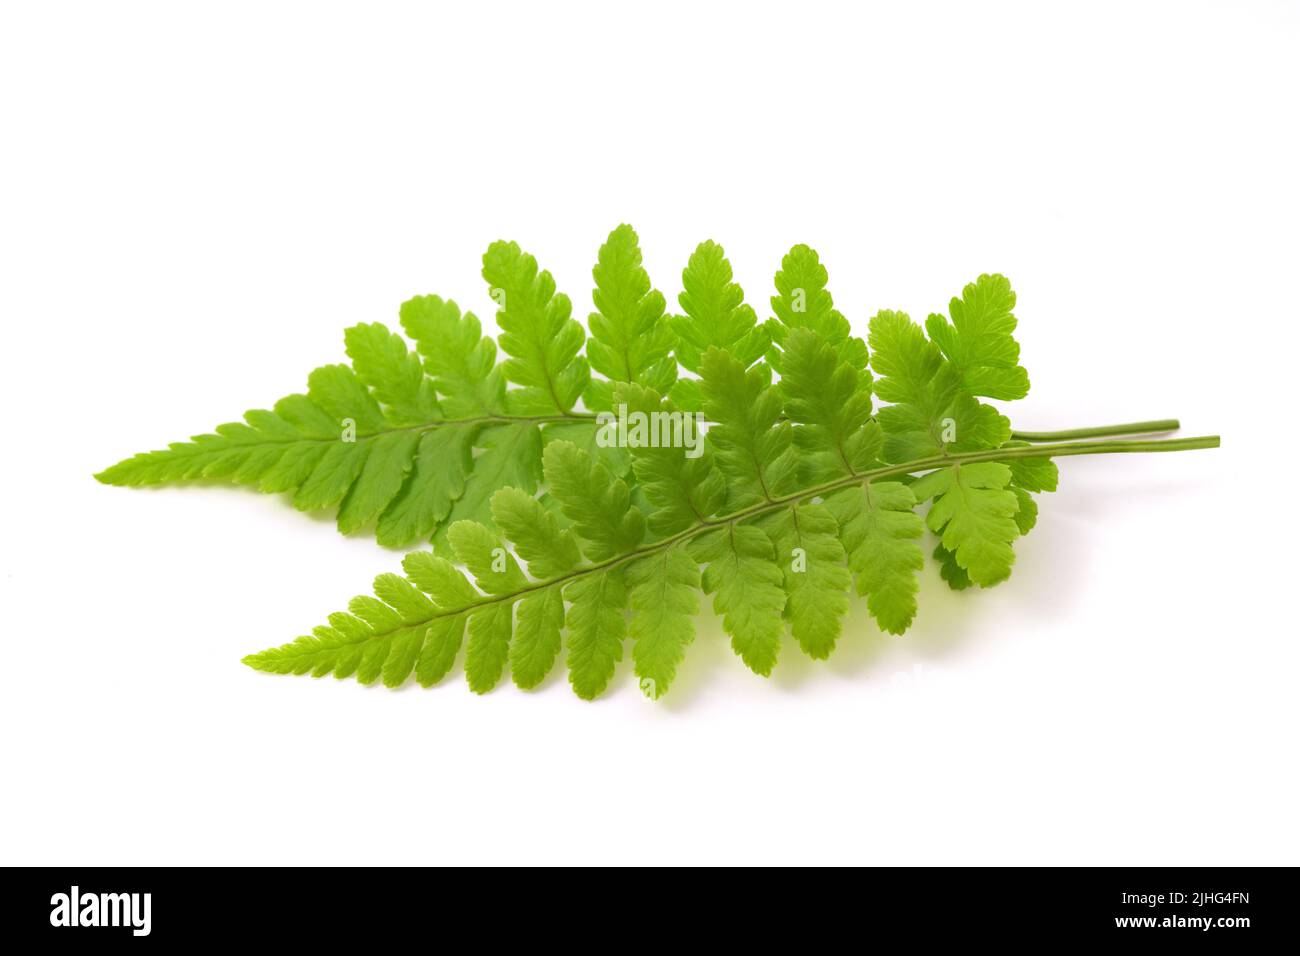 Green fern plants isolated on white background Stock Photo